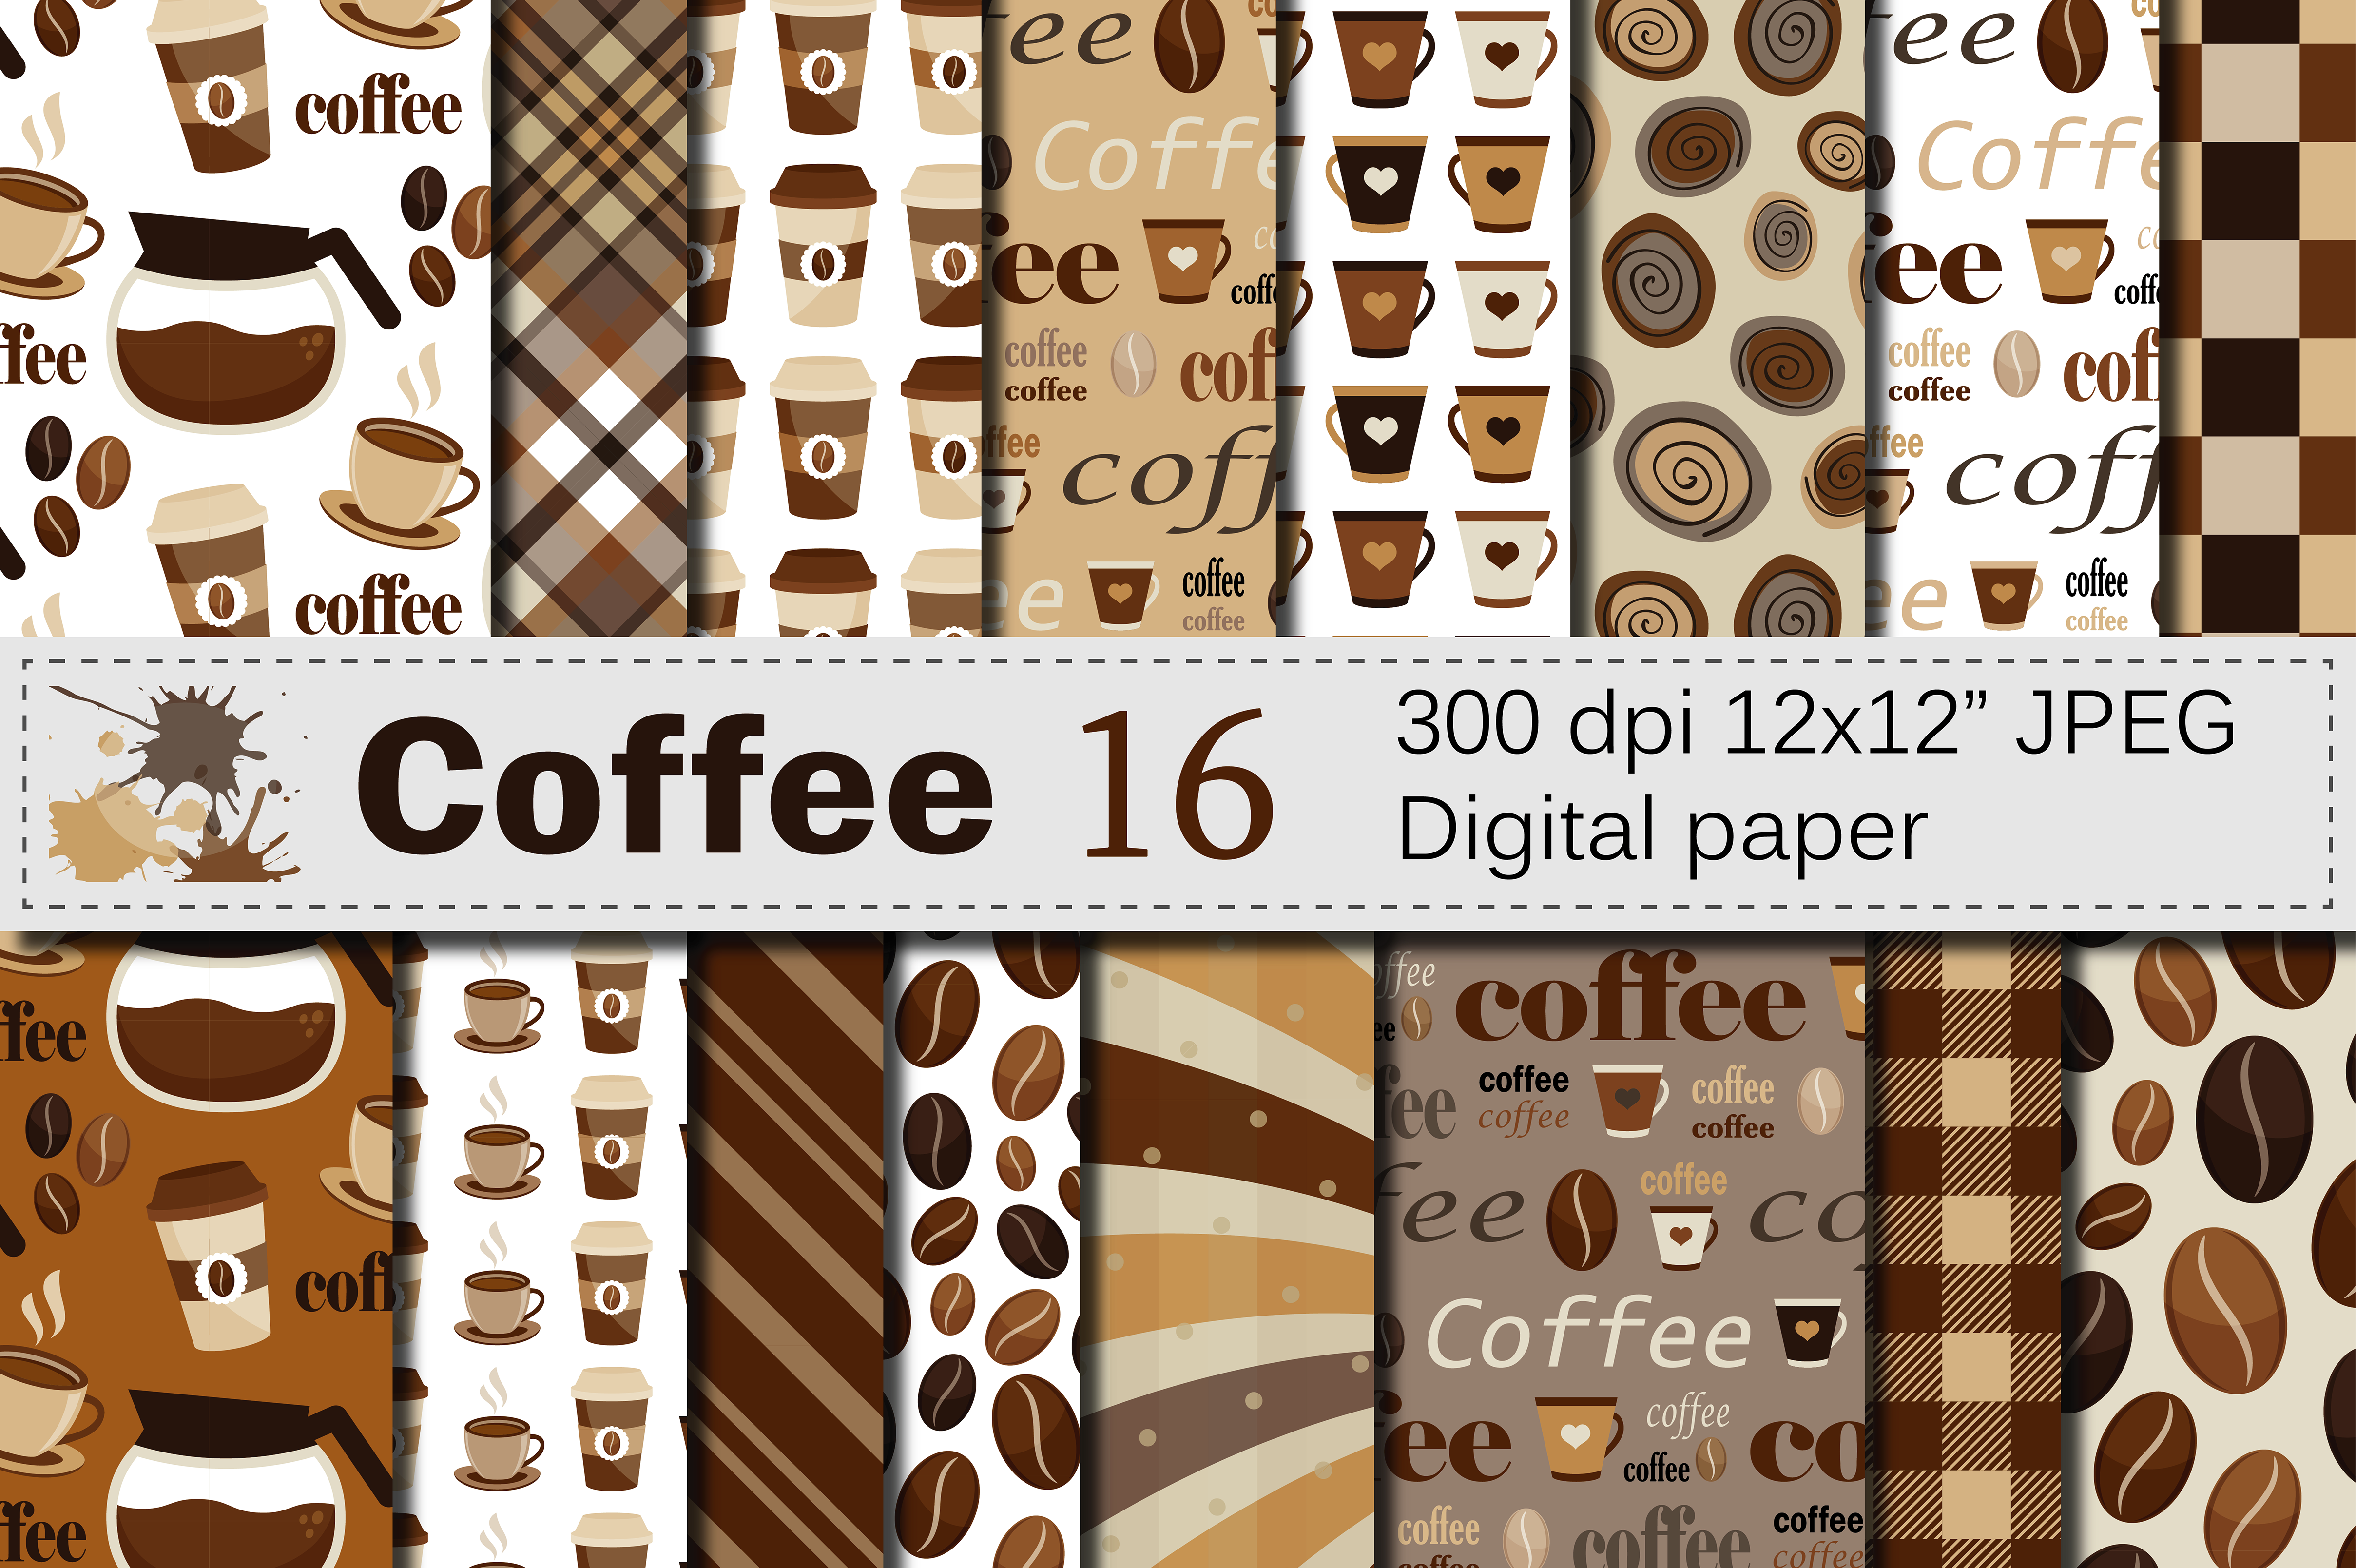 Coffee Digital Paper Pack / Coffee Beans Background / Brown Scrapbooking Paper Graphic Backgrounds By VR Digital Design